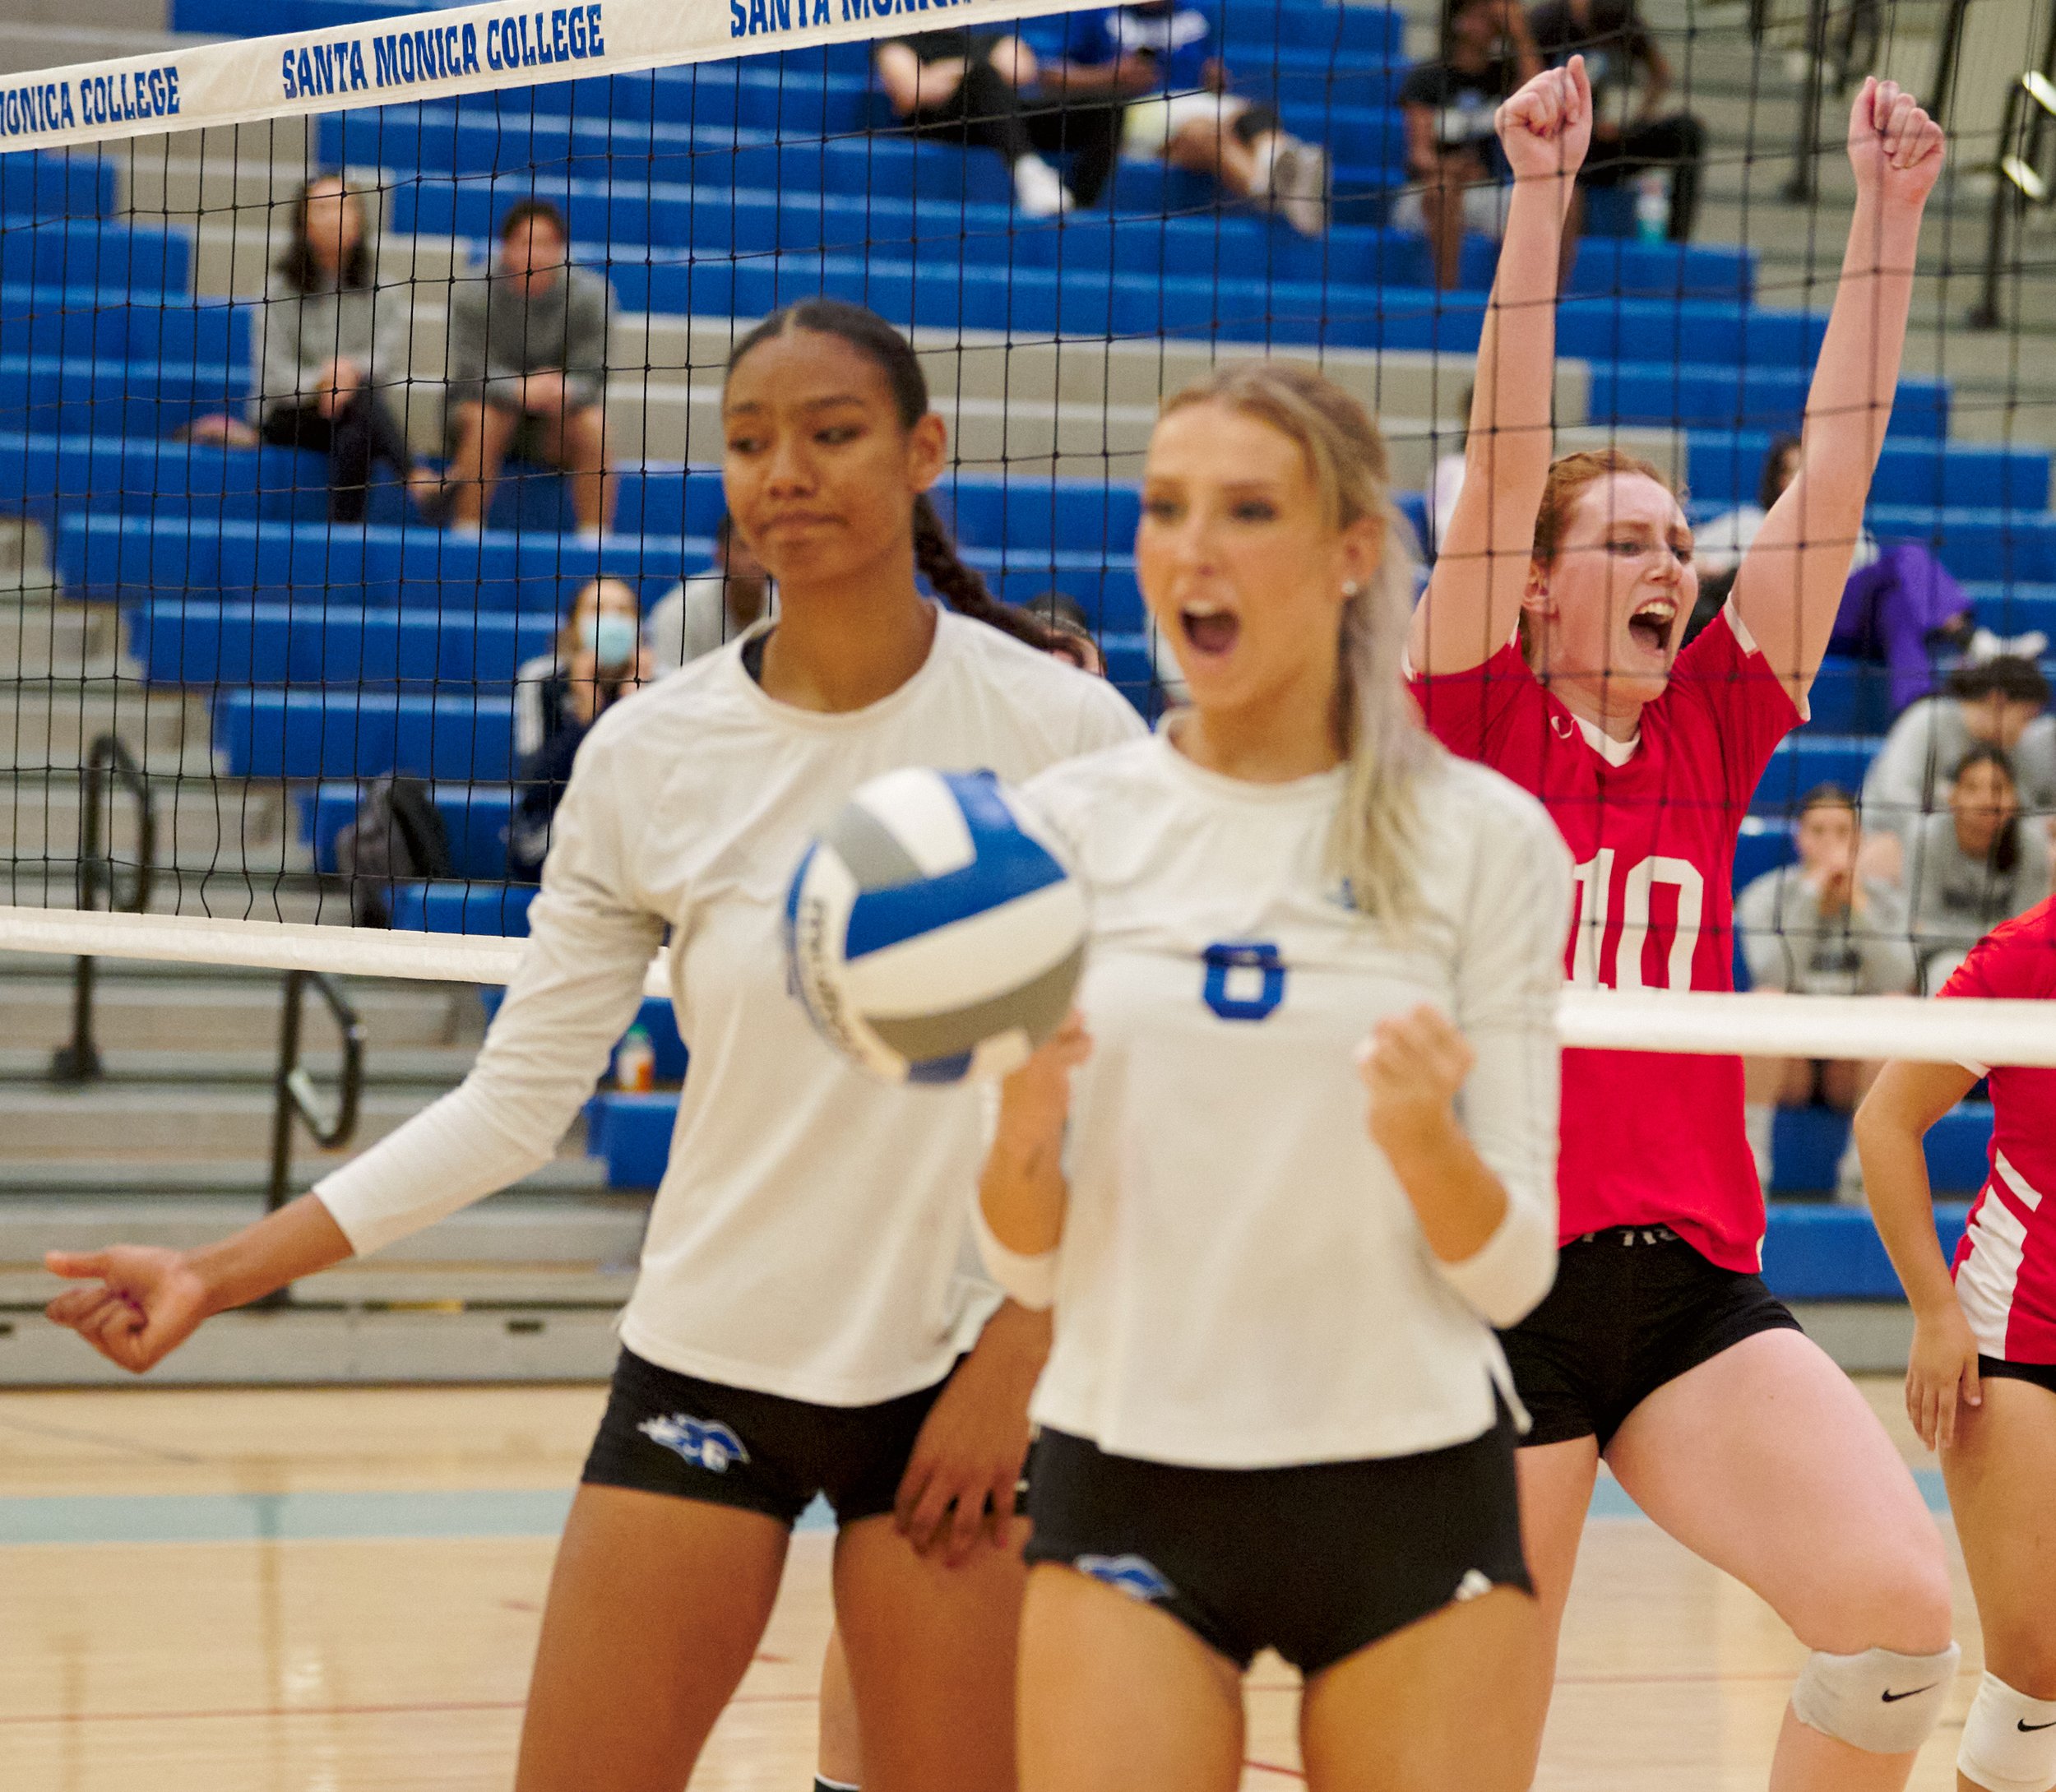  College of the Desert Roadrunners' Katie Alexander (right) celebrates the team's scoring after getting past the blocking by Santa Monica College Corsairs' Rain Martinez (left) and Sophia Lawrance (center) during the women's volleyball match on Frida